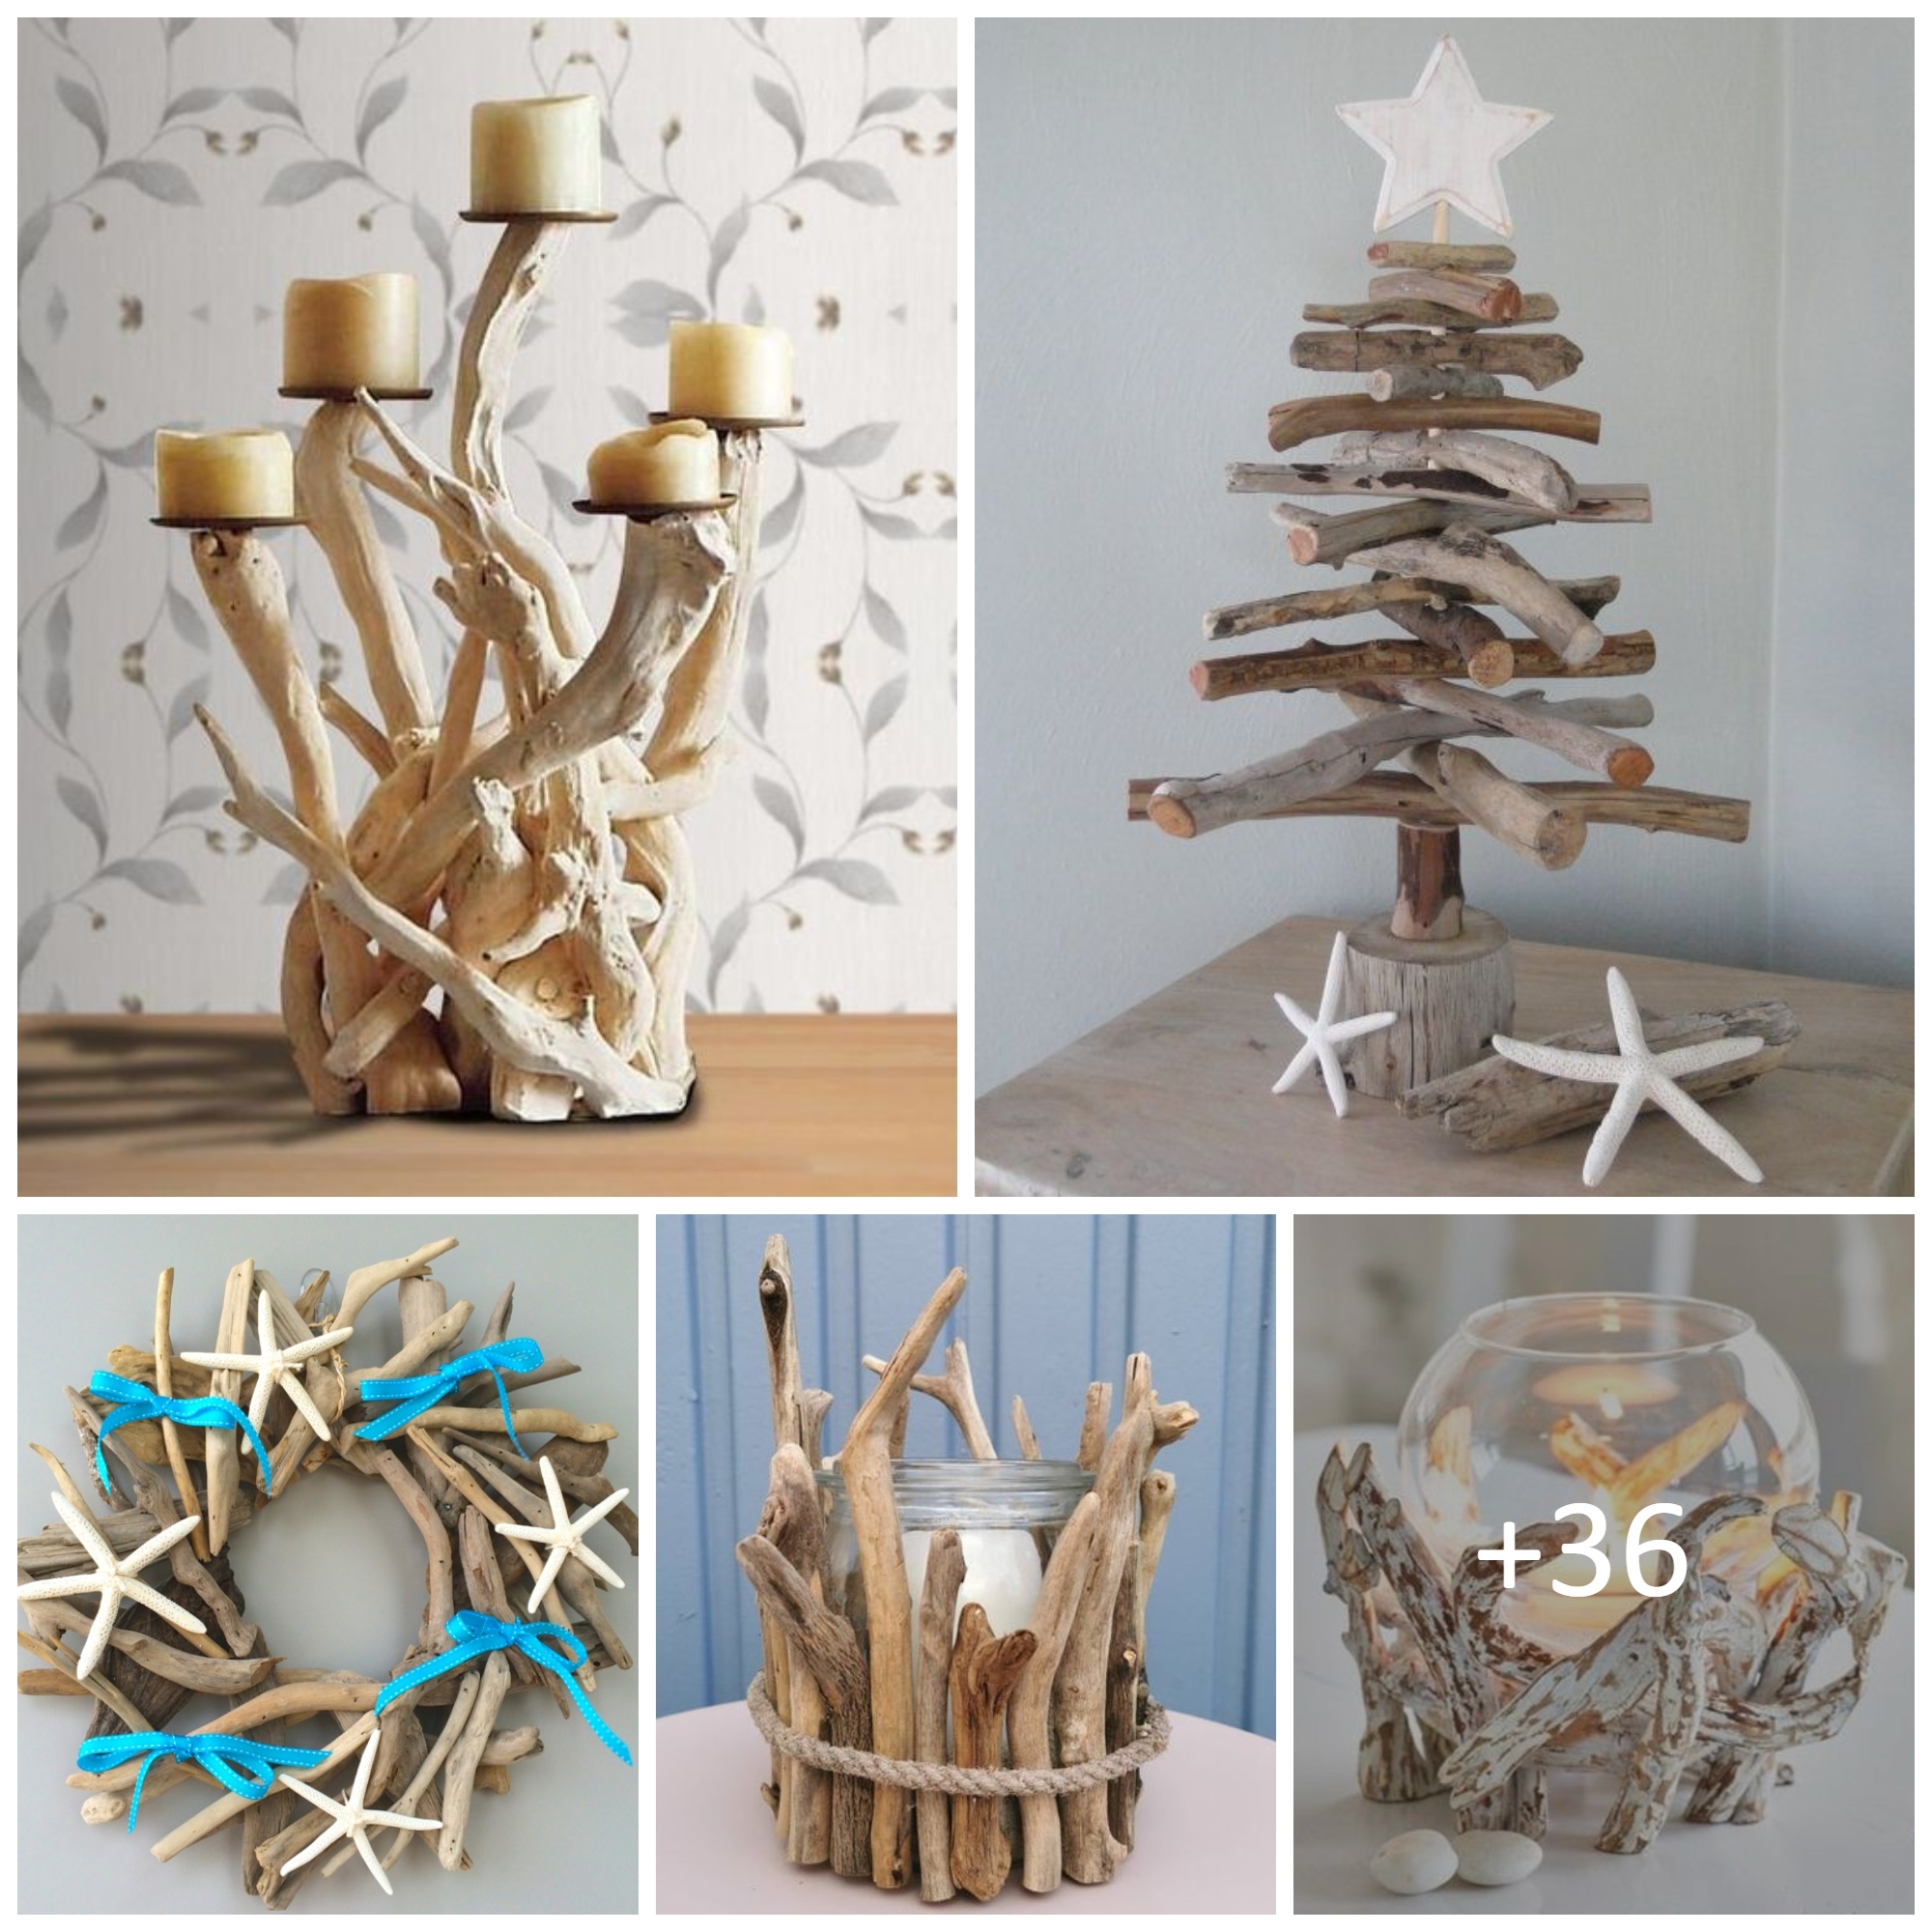 DIY Projects Made With Upcycled Driftwood